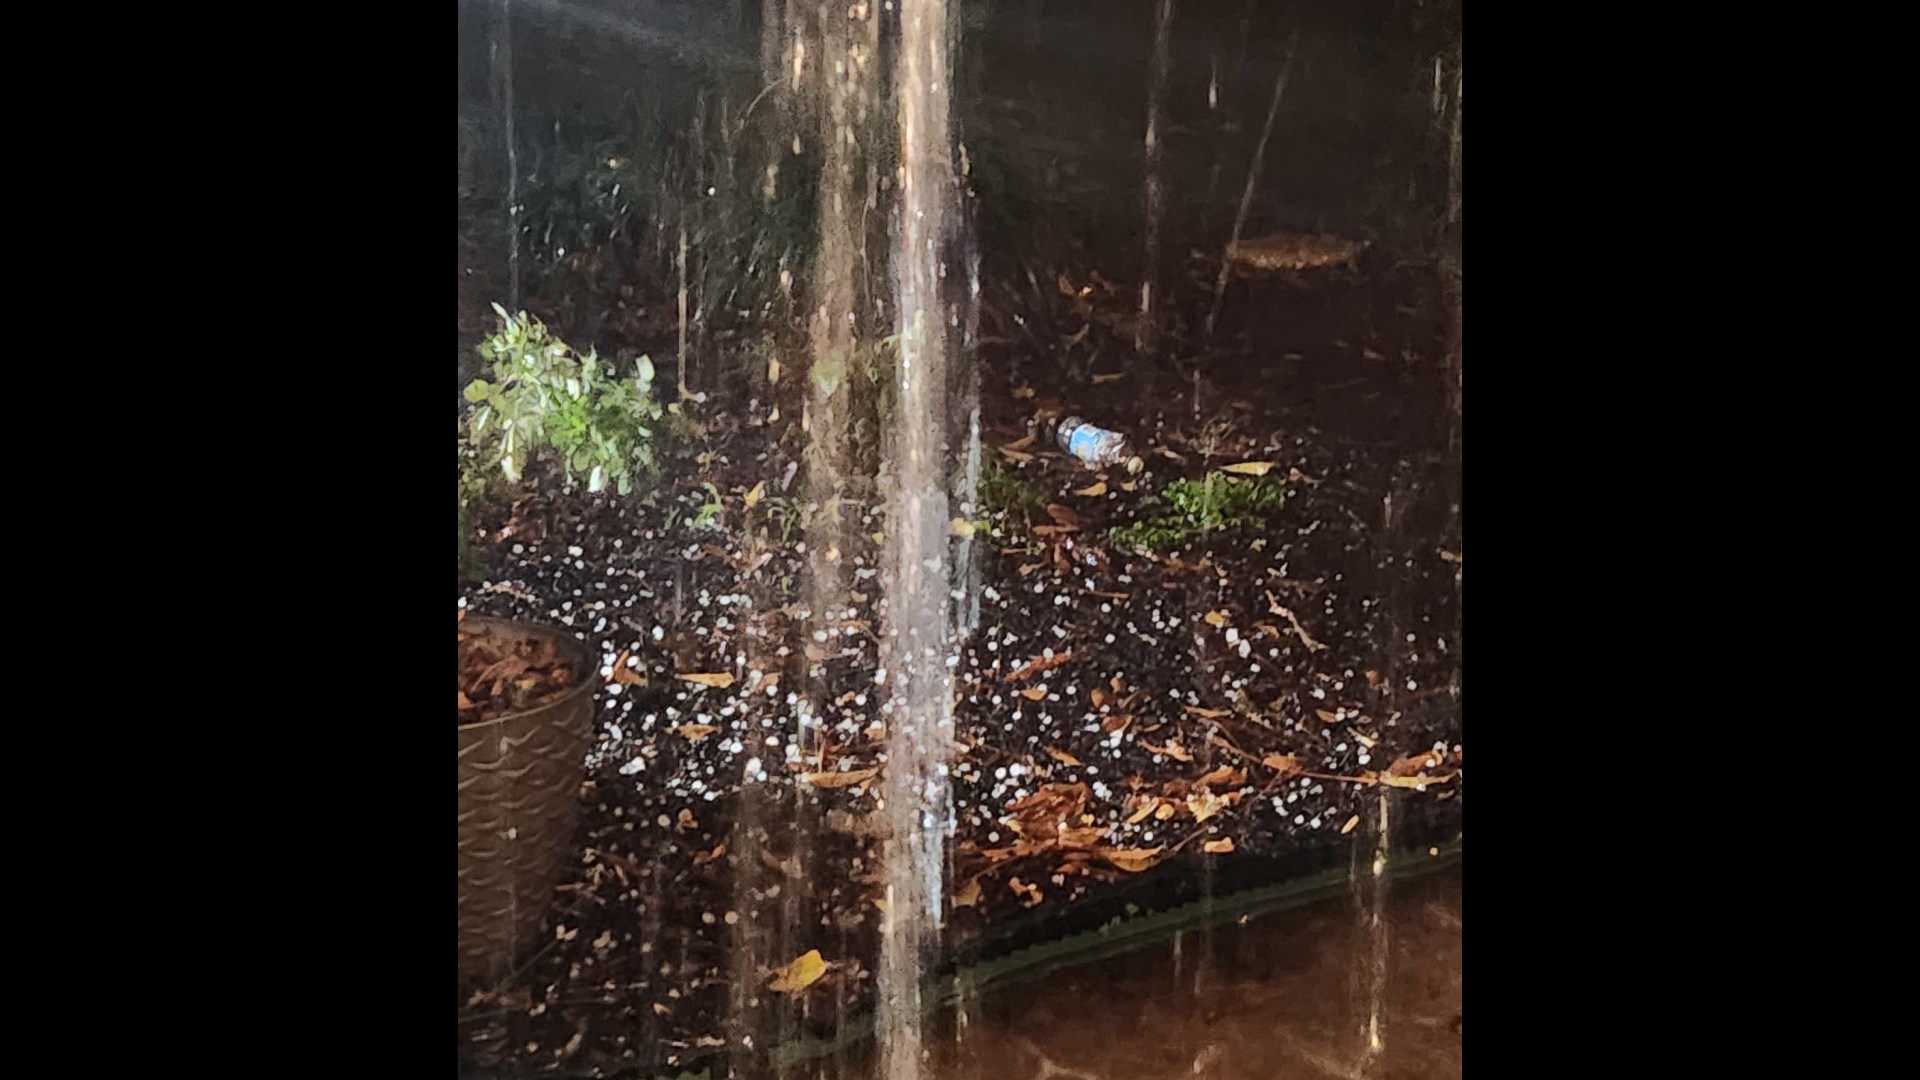 WWL Louisiana viewer Scott Ward captures video of hail falling into his yard located in the Crossgates neighborhood in Slidell, La.